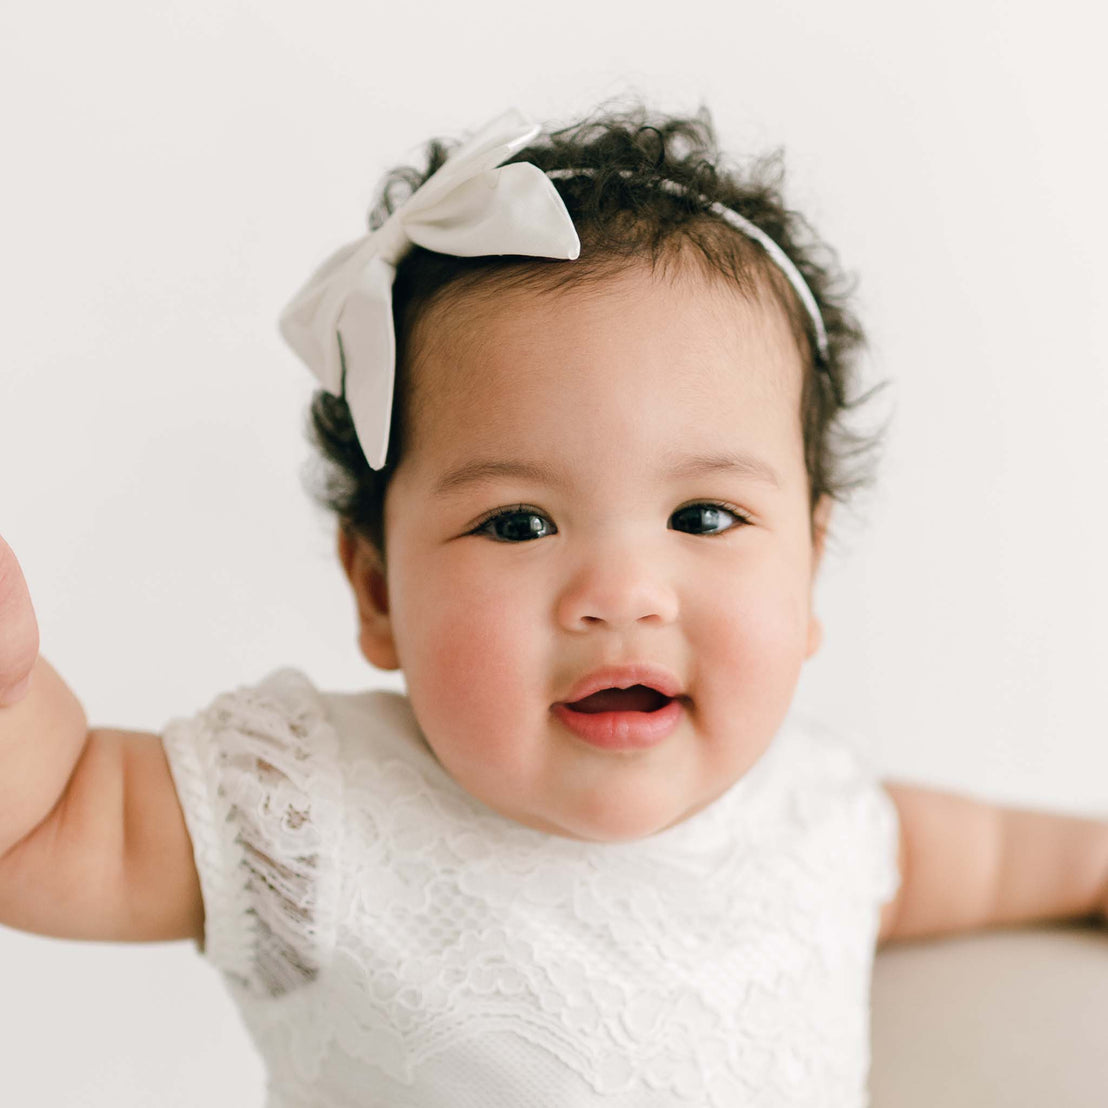 A baby girl with curly hair and a Victoria Silk Bow Headband smiles joyfully, wearing a Victoria Puff Sleeve Christening Dress against a clean, light background.